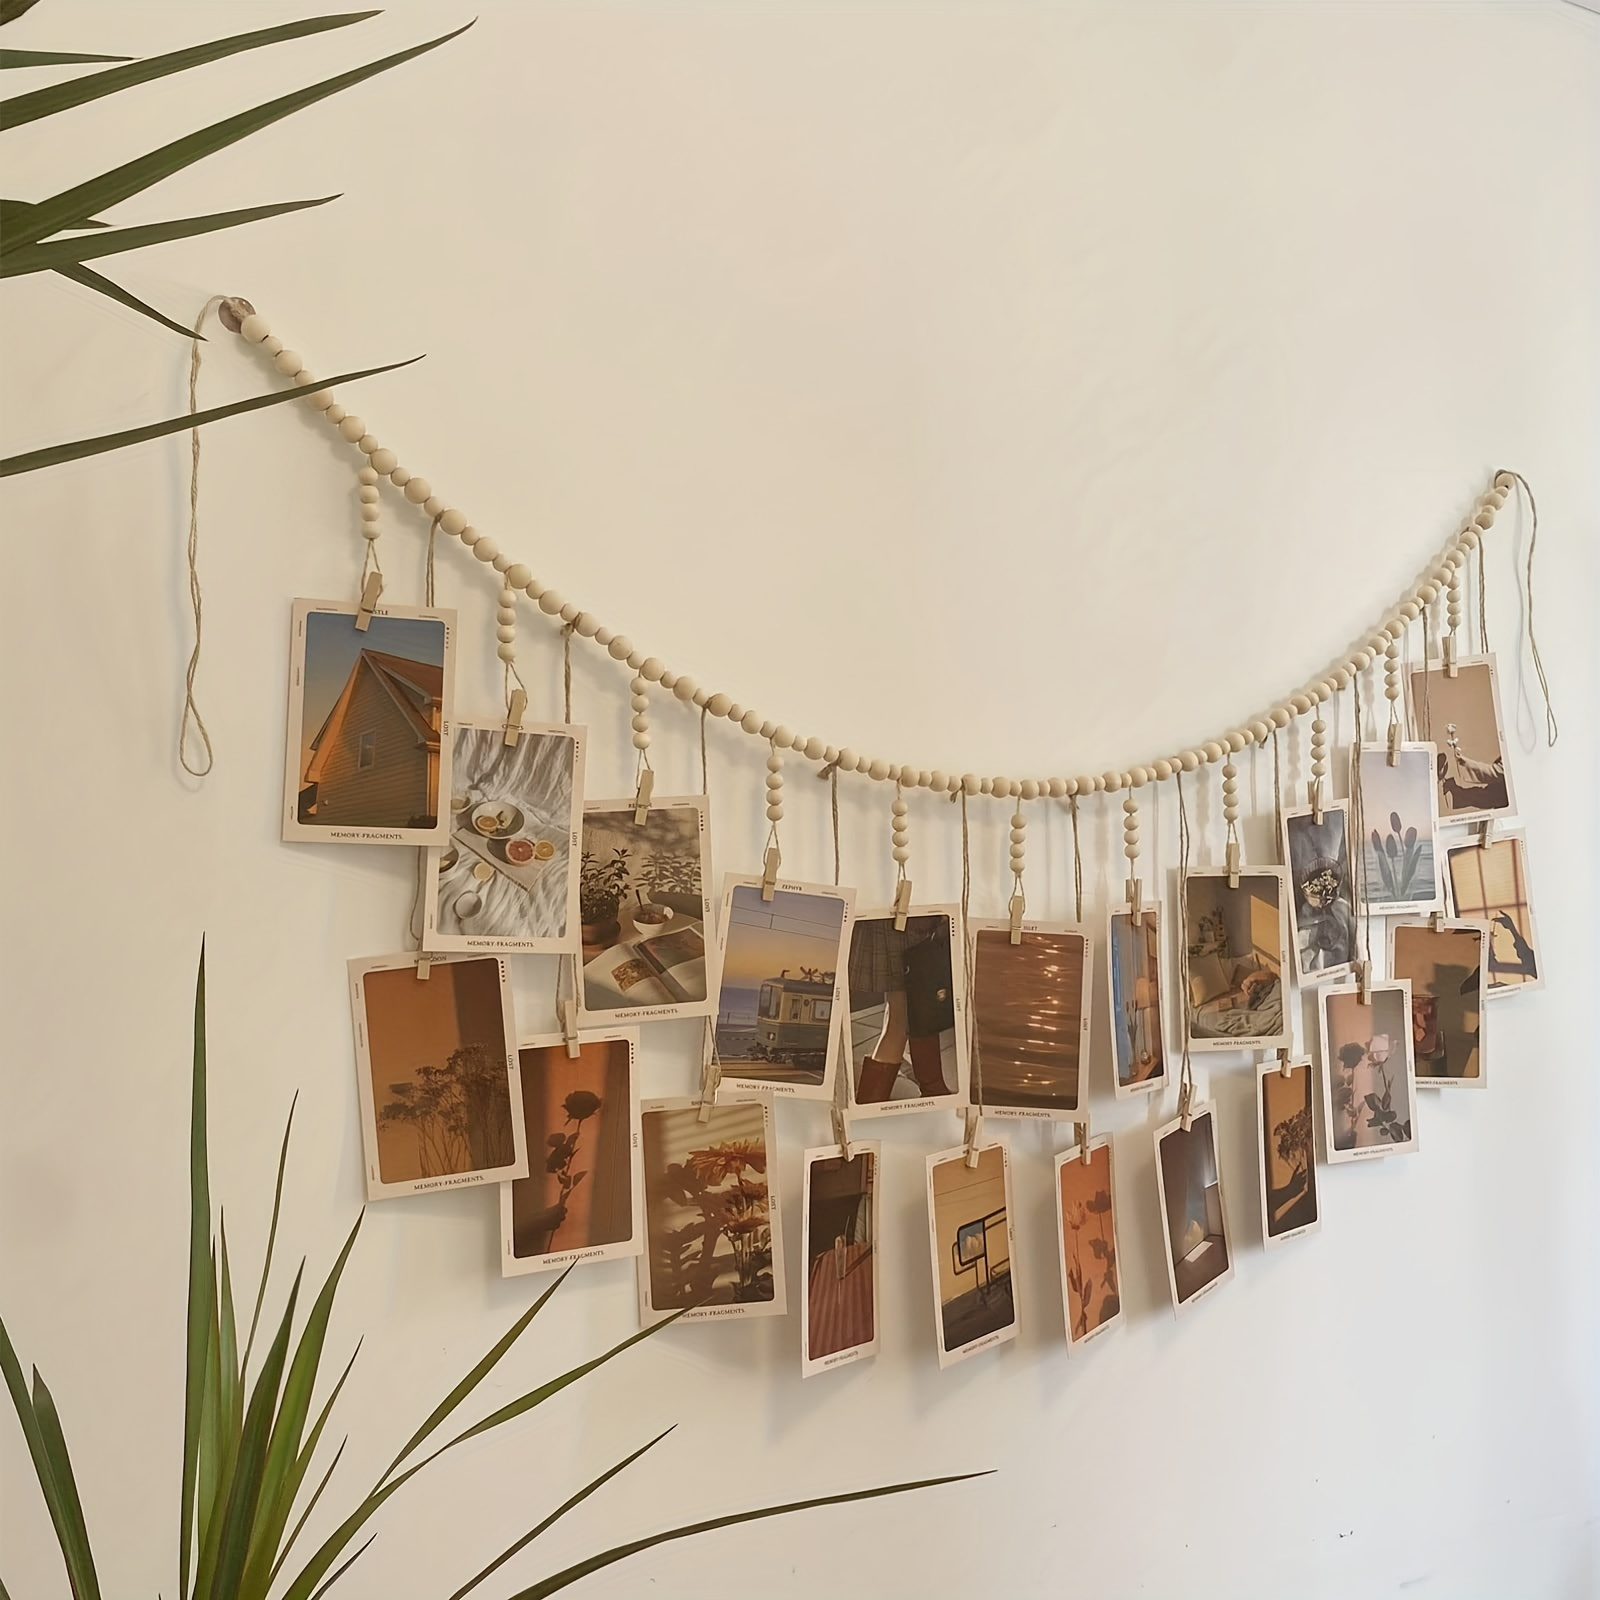 

1pc Hanging Photo Frame With 18 Clips, Boho Wood Bead Decor Hanging Frame Clip For Dorm, Classroom, Bedroom, Home Room Office Decoration, For Christmas Valentine's Day New Year Decor, 150cm/43.3in